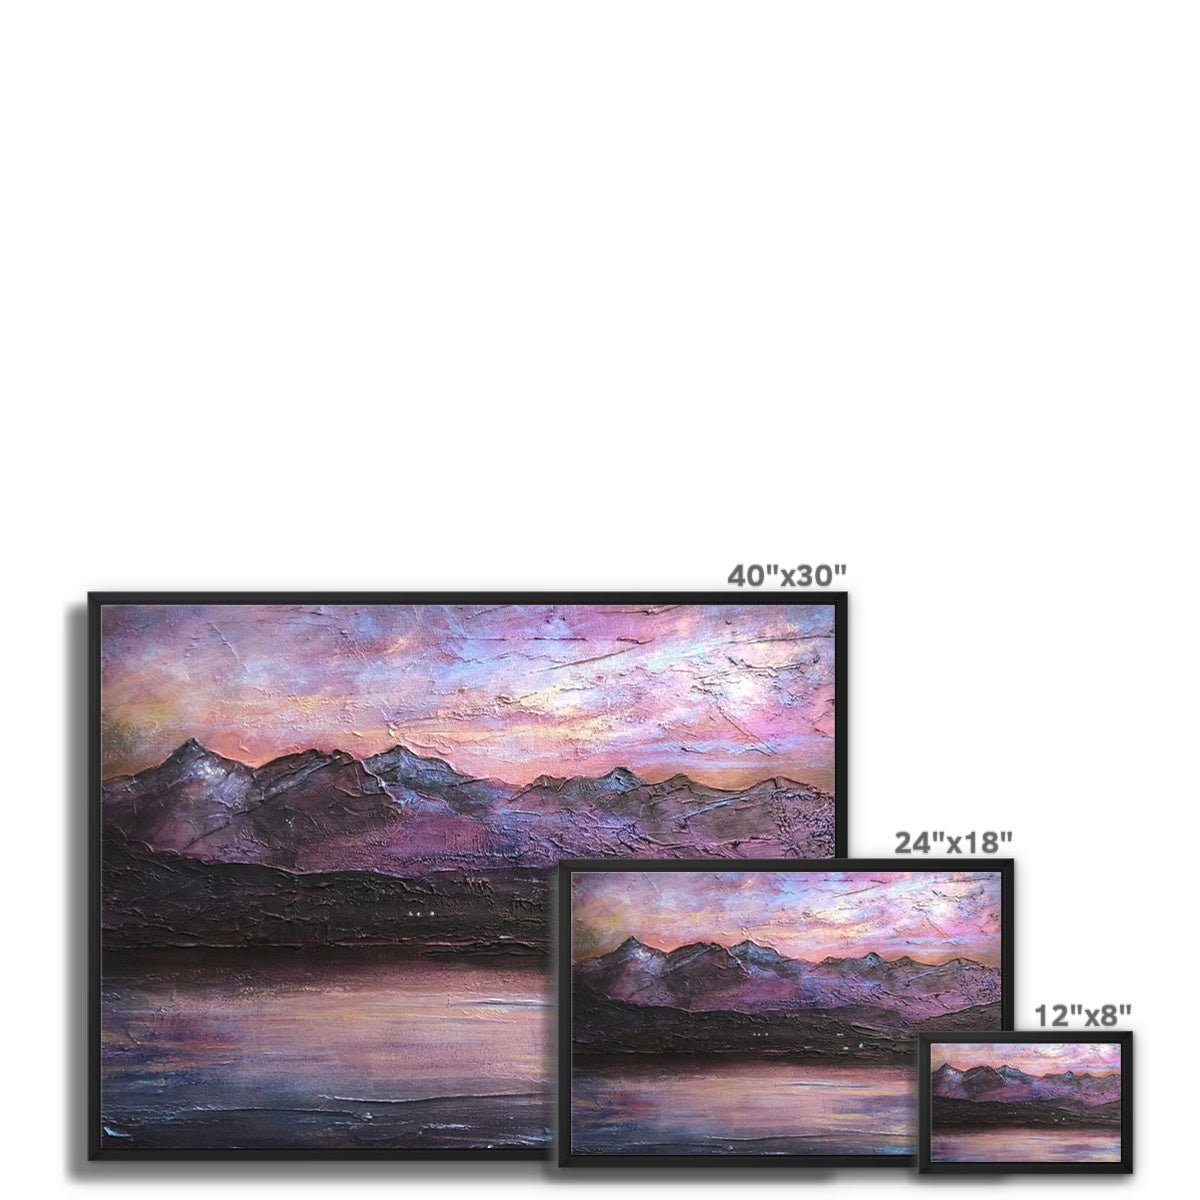 Last Skye Light Painting | Framed Canvas From Scotland-Floating Framed Canvas Prints-Skye Art Gallery-Paintings, Prints, Homeware, Art Gifts From Scotland By Scottish Artist Kevin Hunter